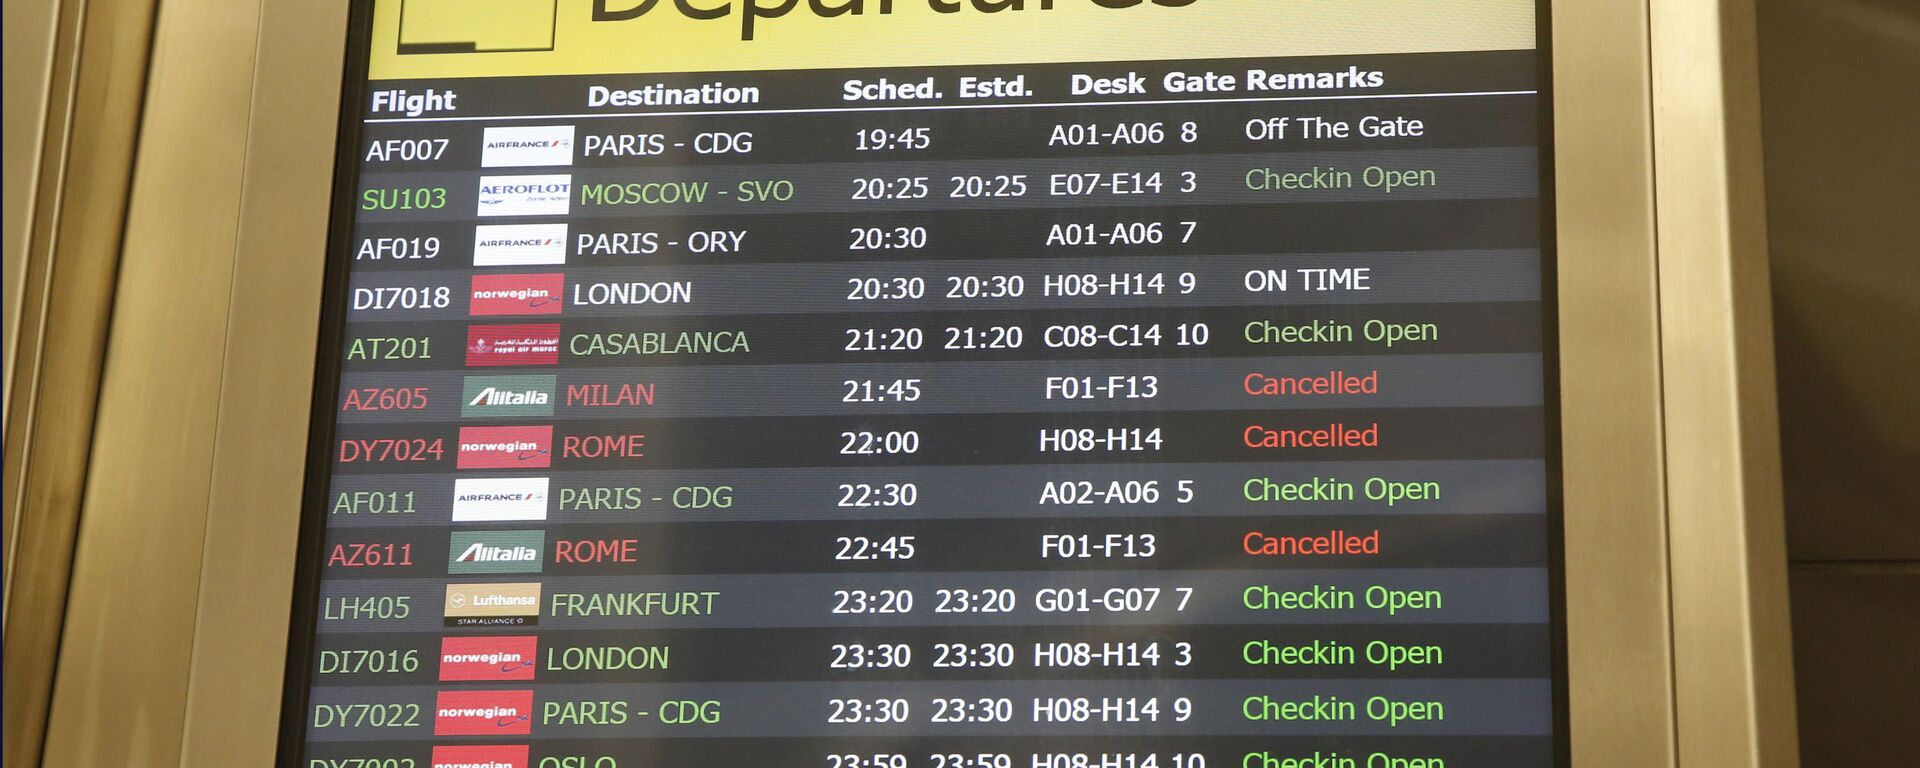 Several airlines with canceled flights are shown on a departures board at JFK airport's Terminal 1, Friday, March 13, 2020, in New York. The coronavirus outbreak is affecting the airline industry hard. Travelers from most European countries to the United States are banned for the next 30 days after President Trump announced the ban earlier in the week. Returning passengers will be screened. The global travel industry is already reeling from falling bookings and canceled reservations as people try to avoid contracting and spreading the virus. - Sputnik International, 1920